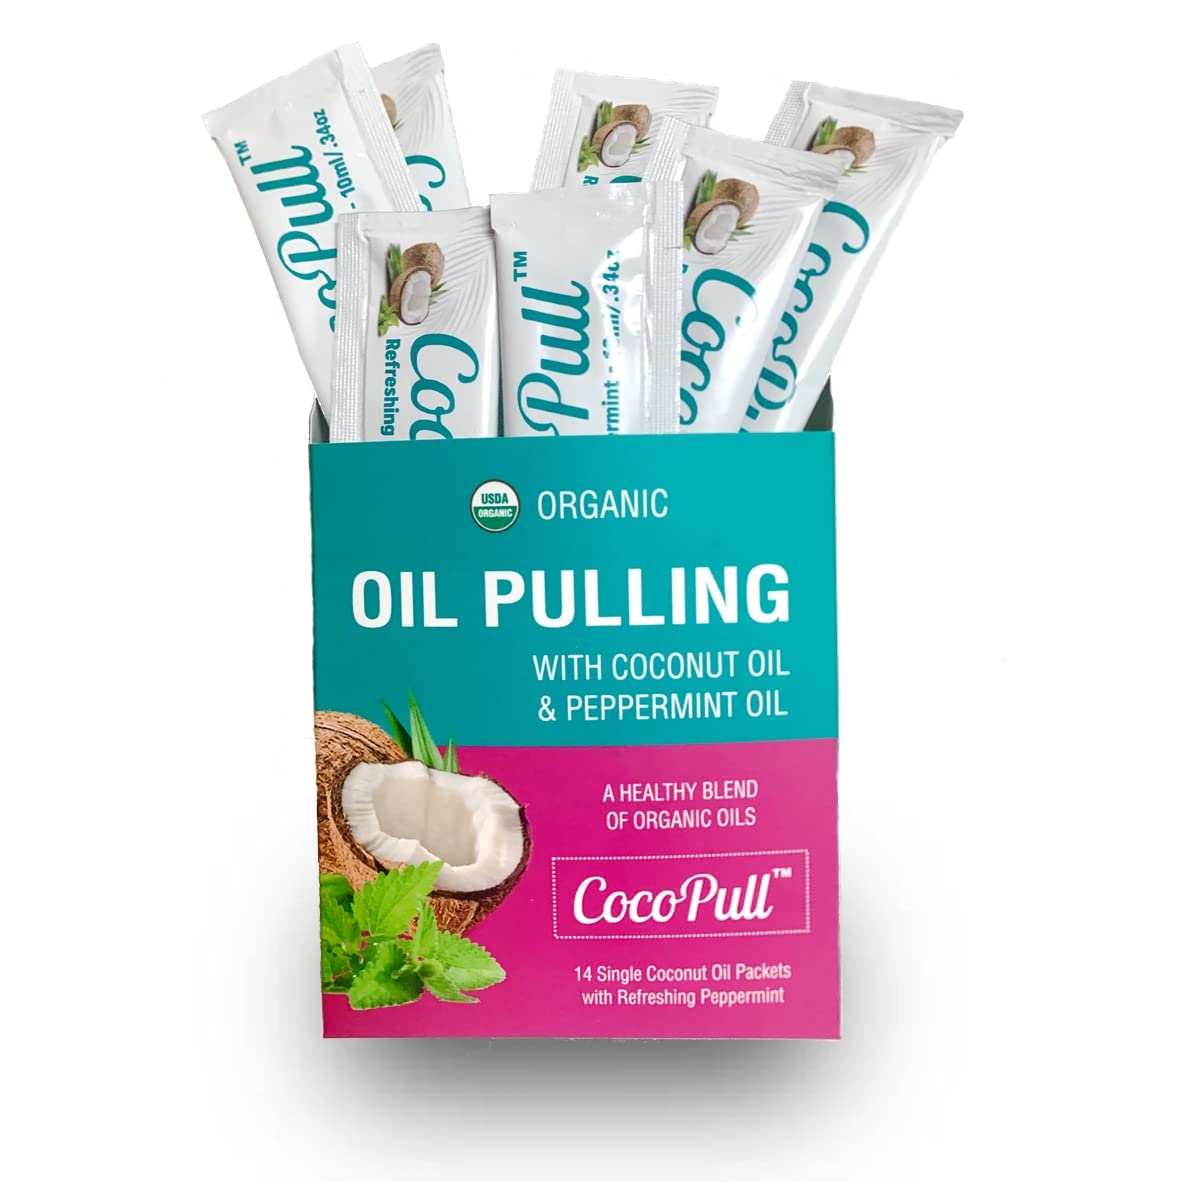 Cocopull - Organic Oil Pulling 14 Packets/Sachets With Coconut Oil And Peppermint Oil For Healthy Teeth, Gums, Bad Breath Remedy. Natural Teeth Whitening.